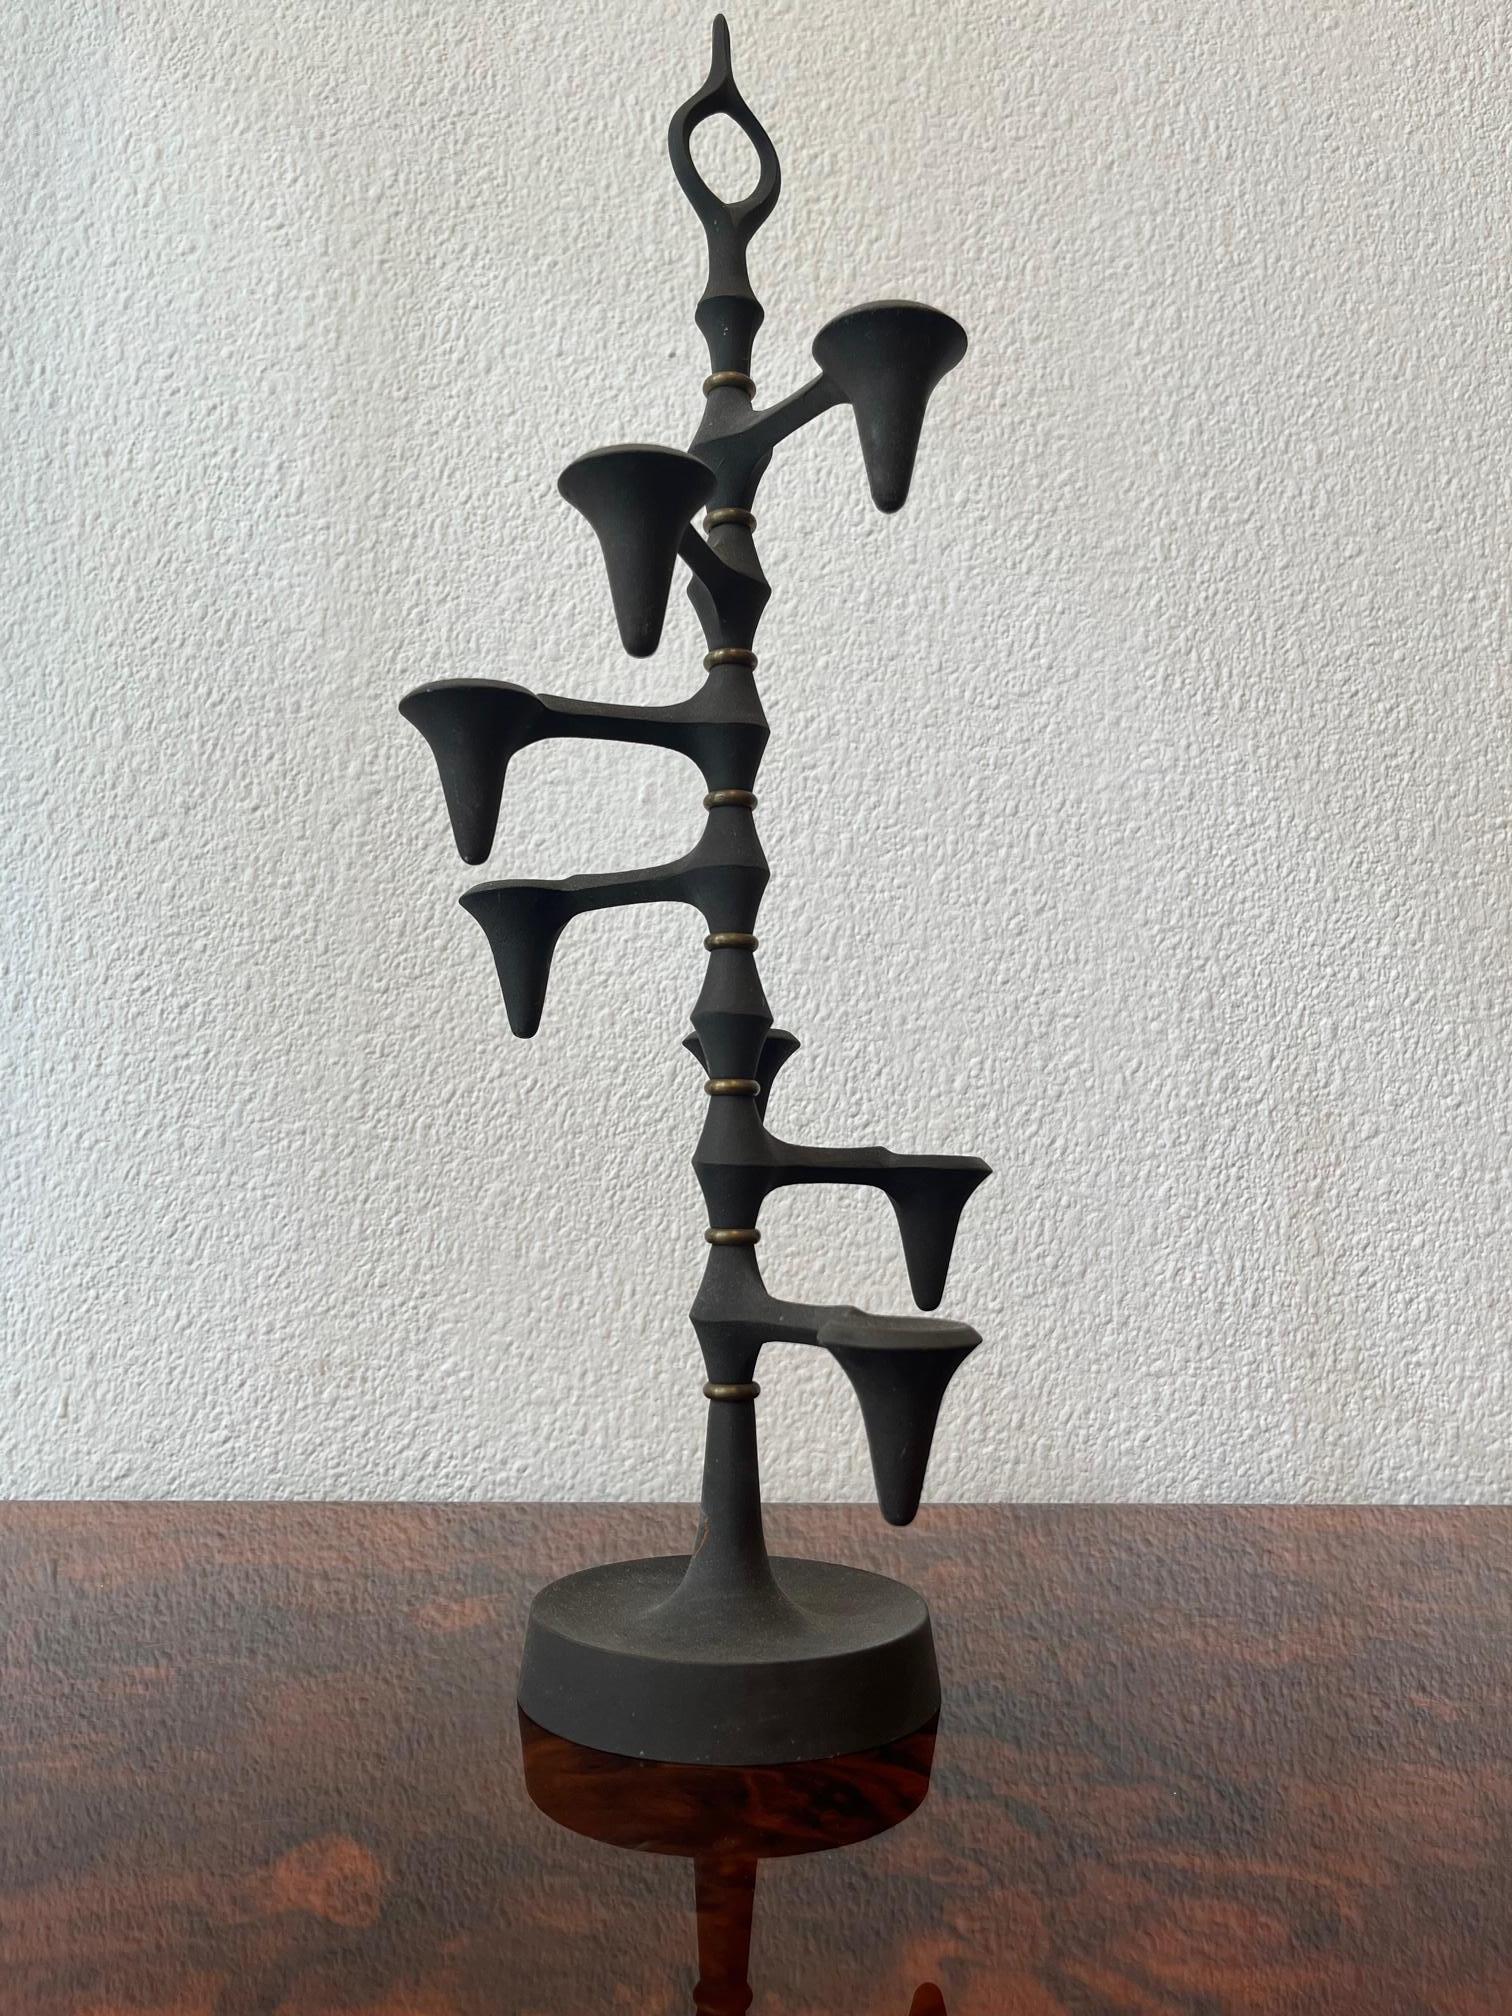 vintage cast iron adjustable candlestick made in Denmark by Jens Quistgaard produced by Dansk ca. 1960
H 48 x D 20 cm
Signed under the base
